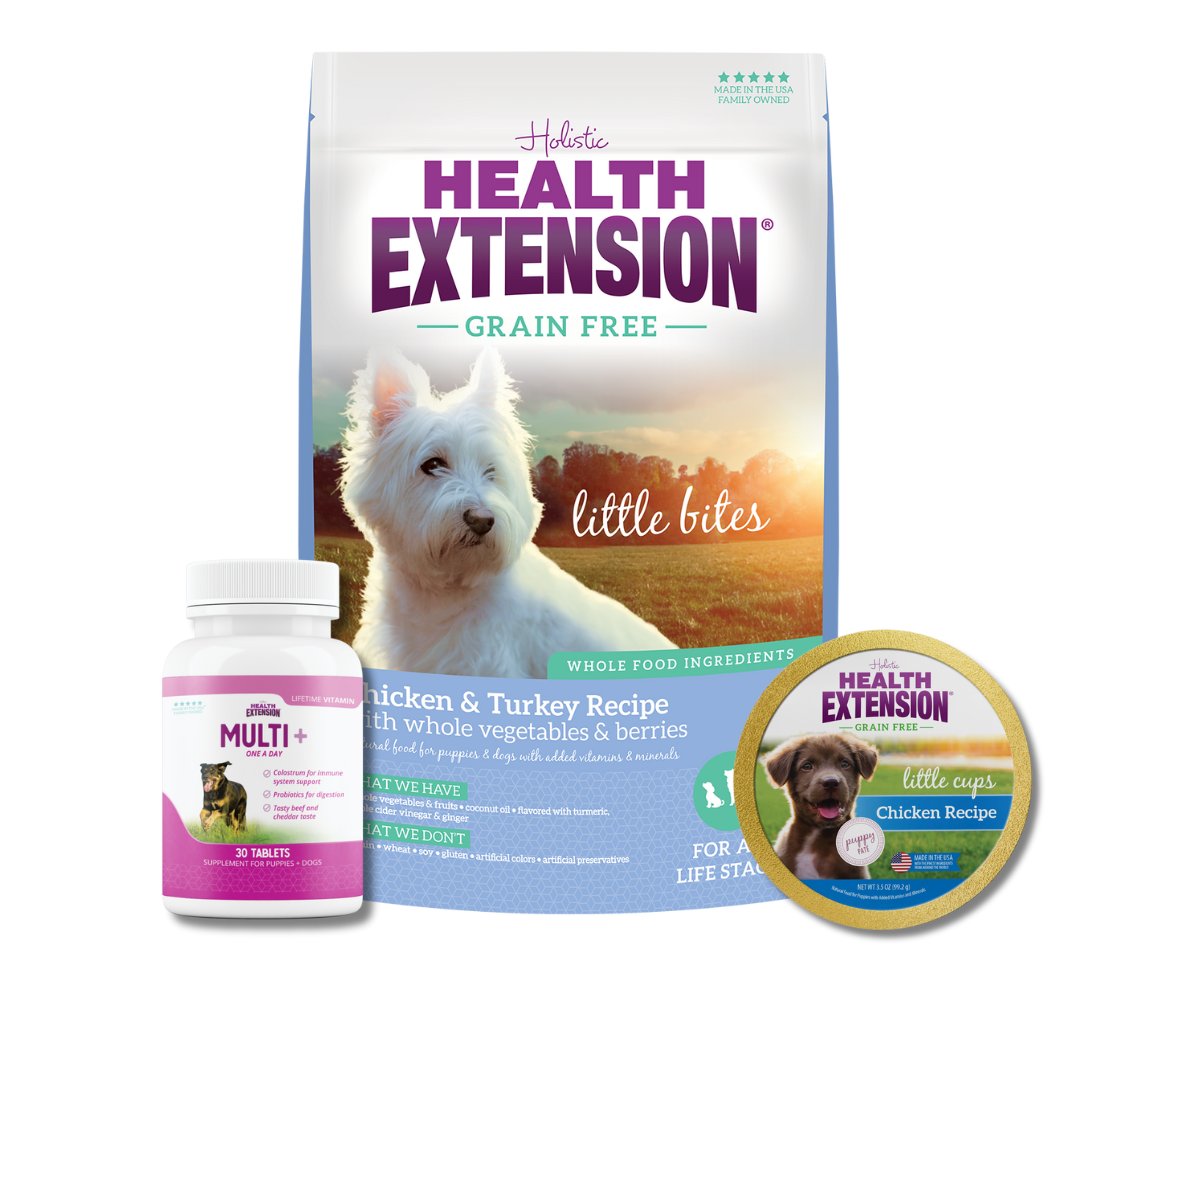 Puppy Trial Bundle for Small Breed: Bag of Health Extension Grain Free Chicken & Turkey Little Bites,  a bottle of Health Extension Multi+ vitamins for puppies and dogs, Grain Free Little Cups for Small Breeds